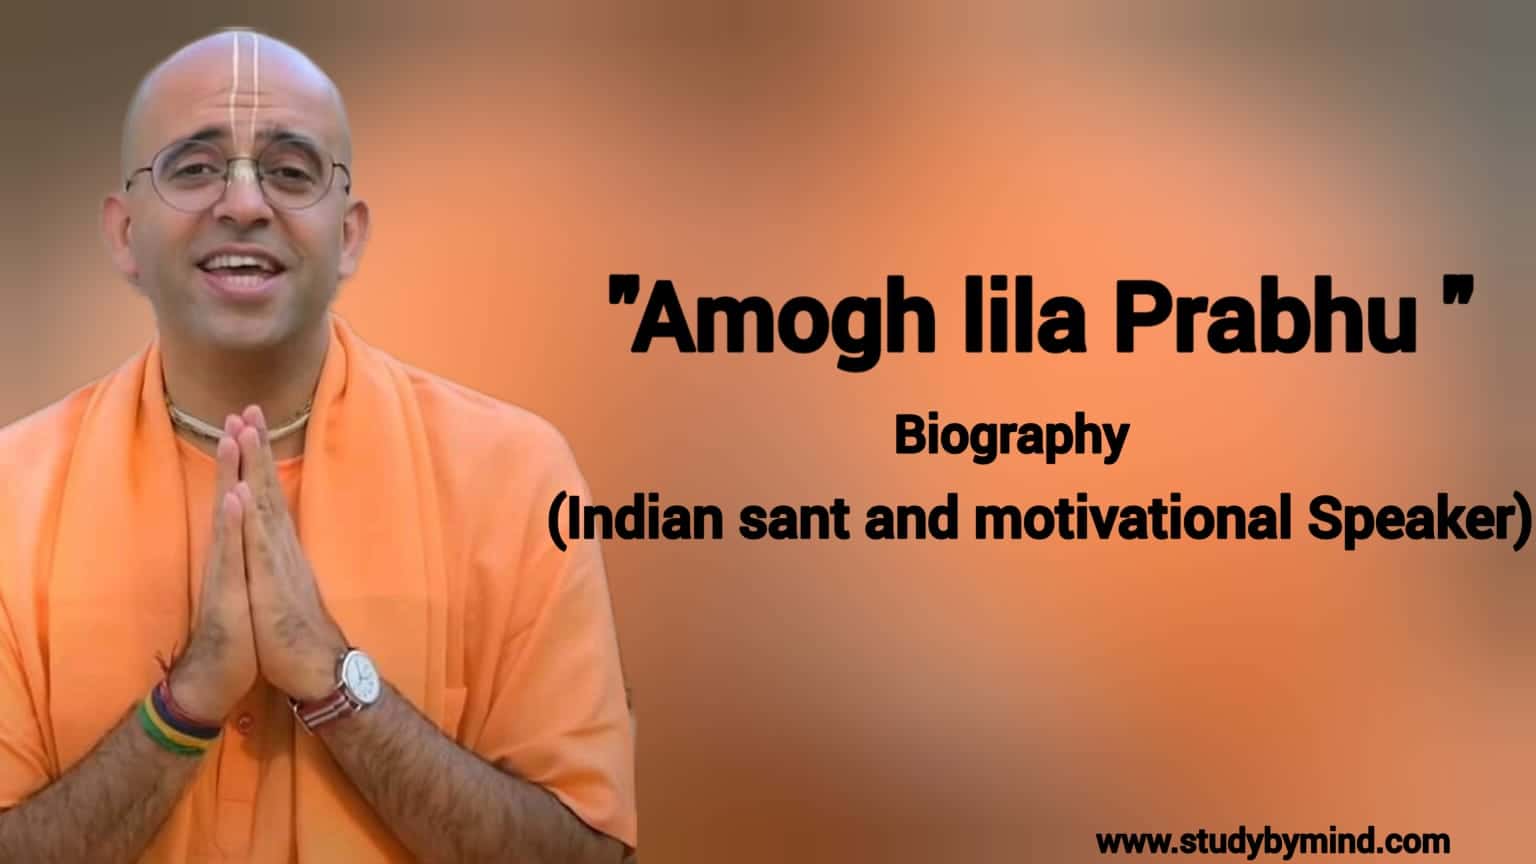 You are currently viewing Amogh lila prabhu biography in english (Indian saint and Motivational speaker)